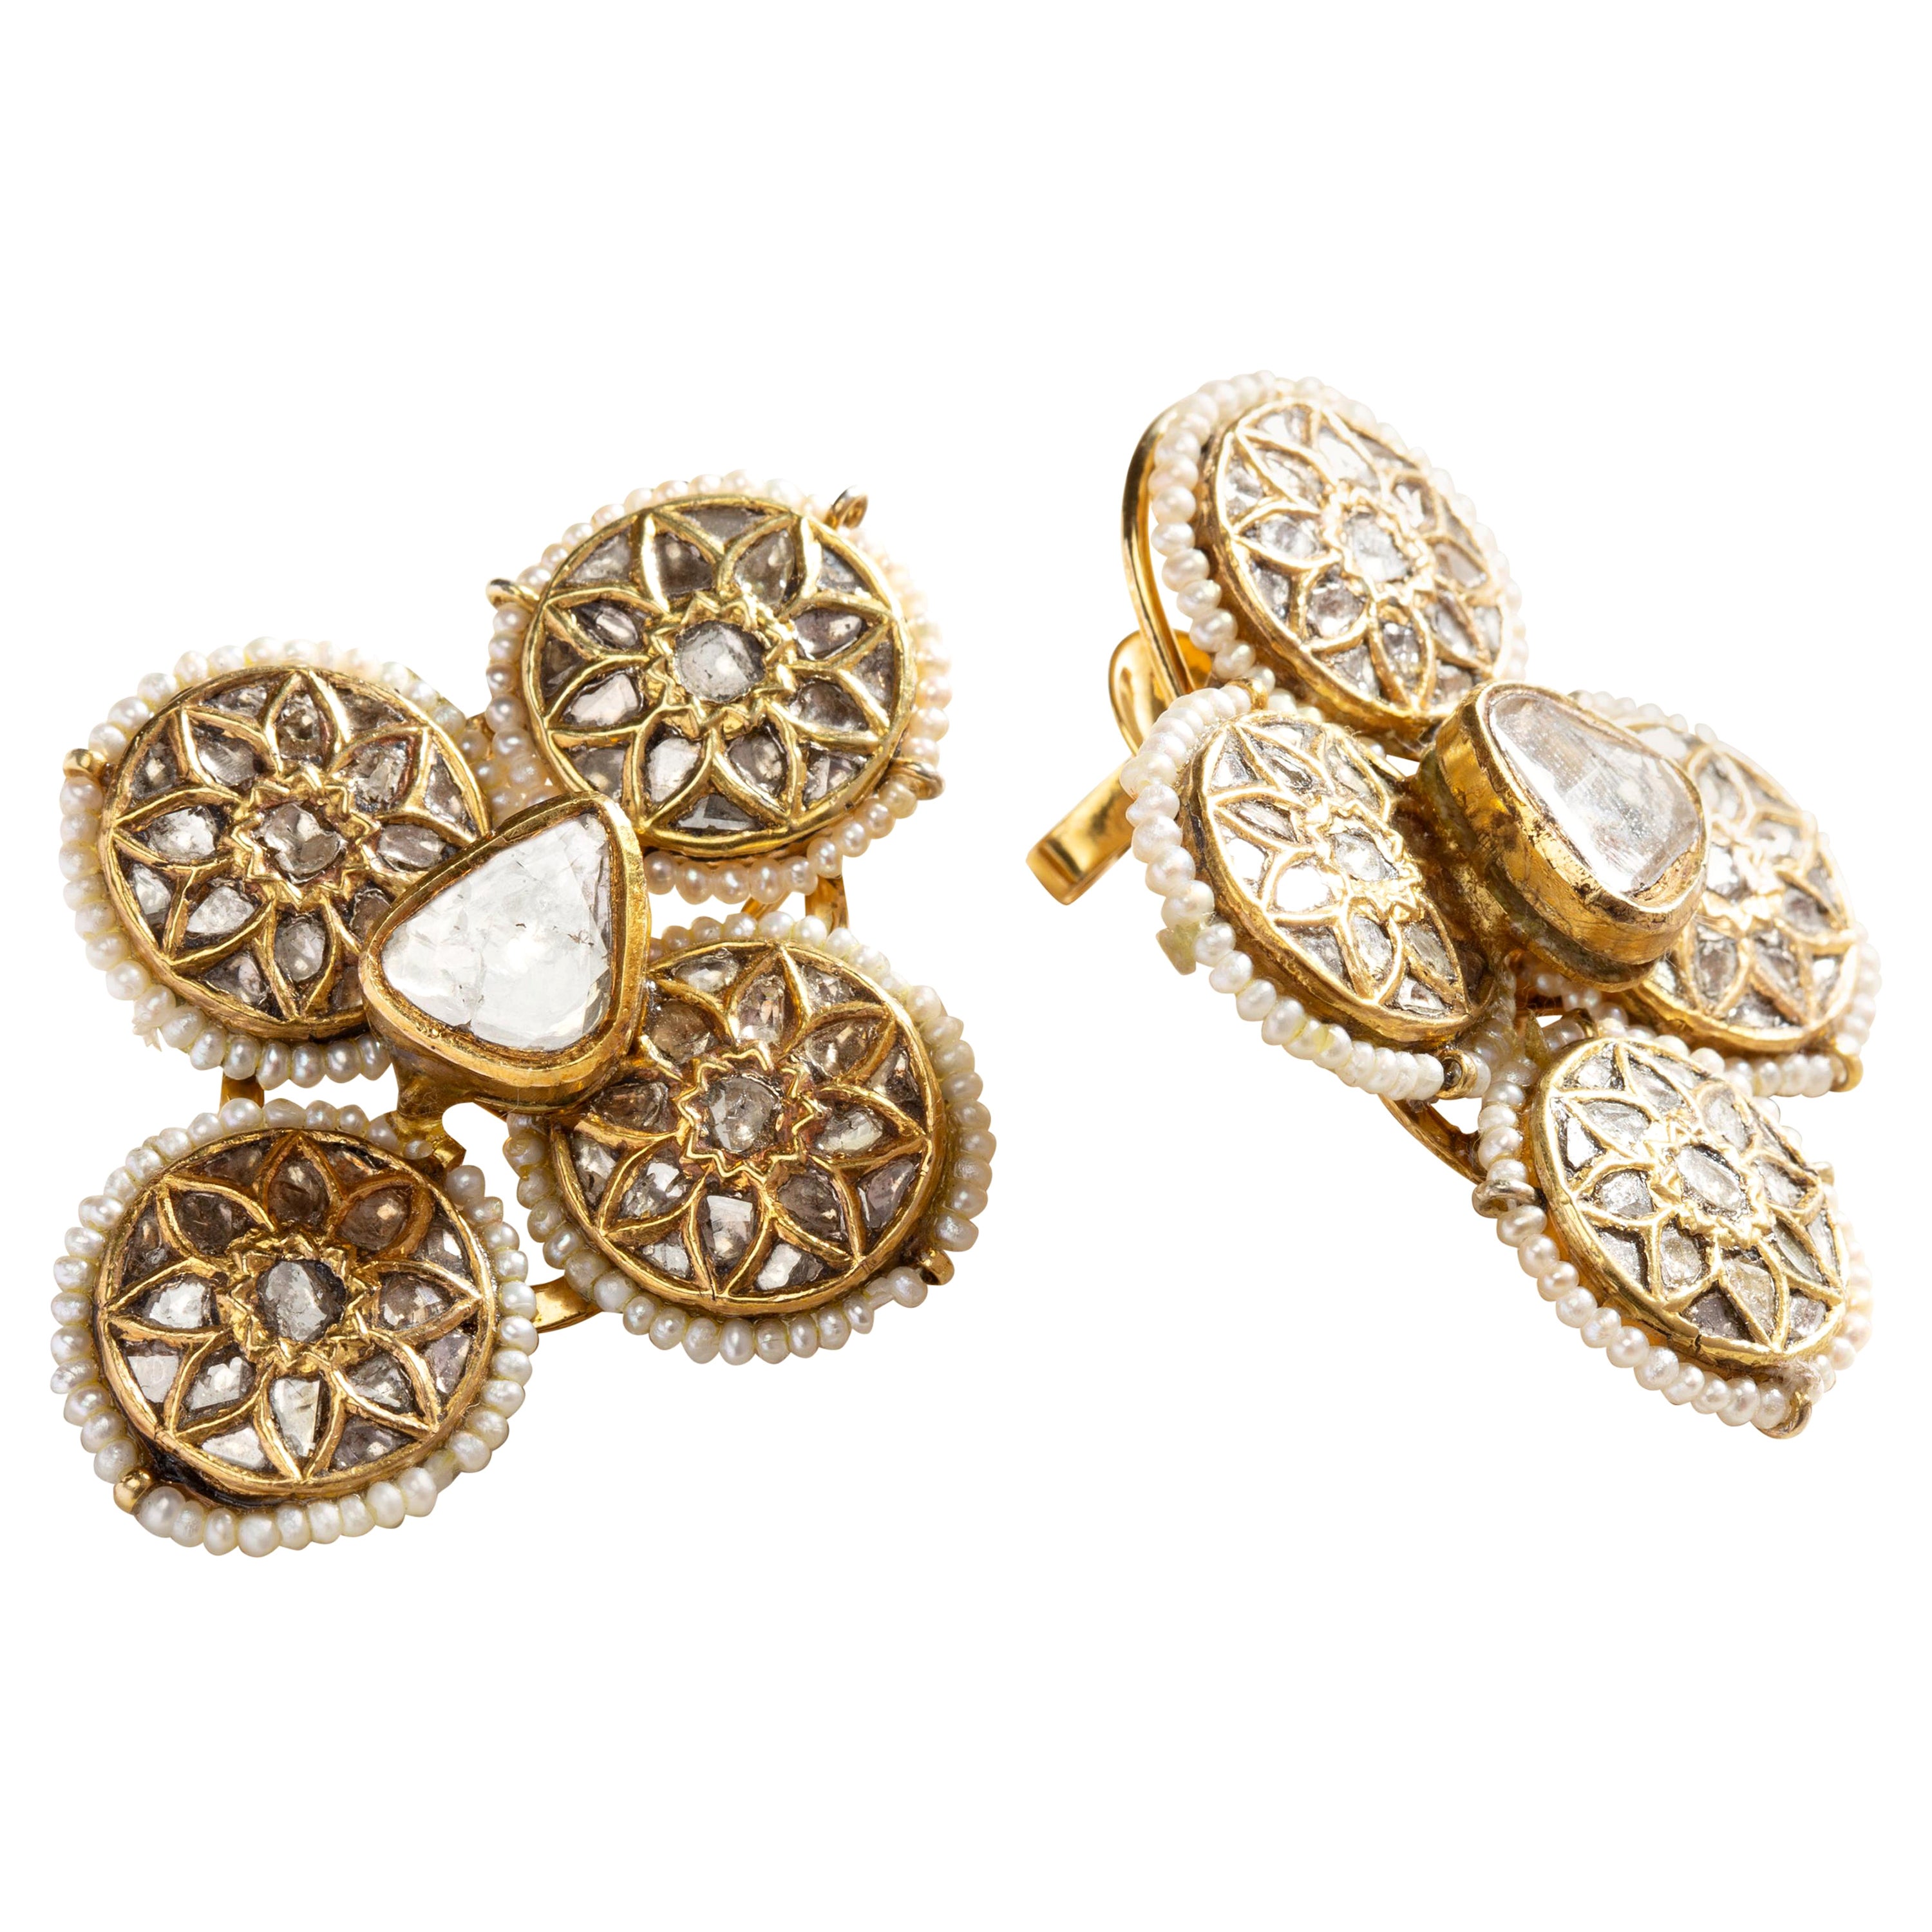 Enchanted by Mughal Elegance: Uncut Diamond Solitaire Earrings in 22kt Gold For Sale